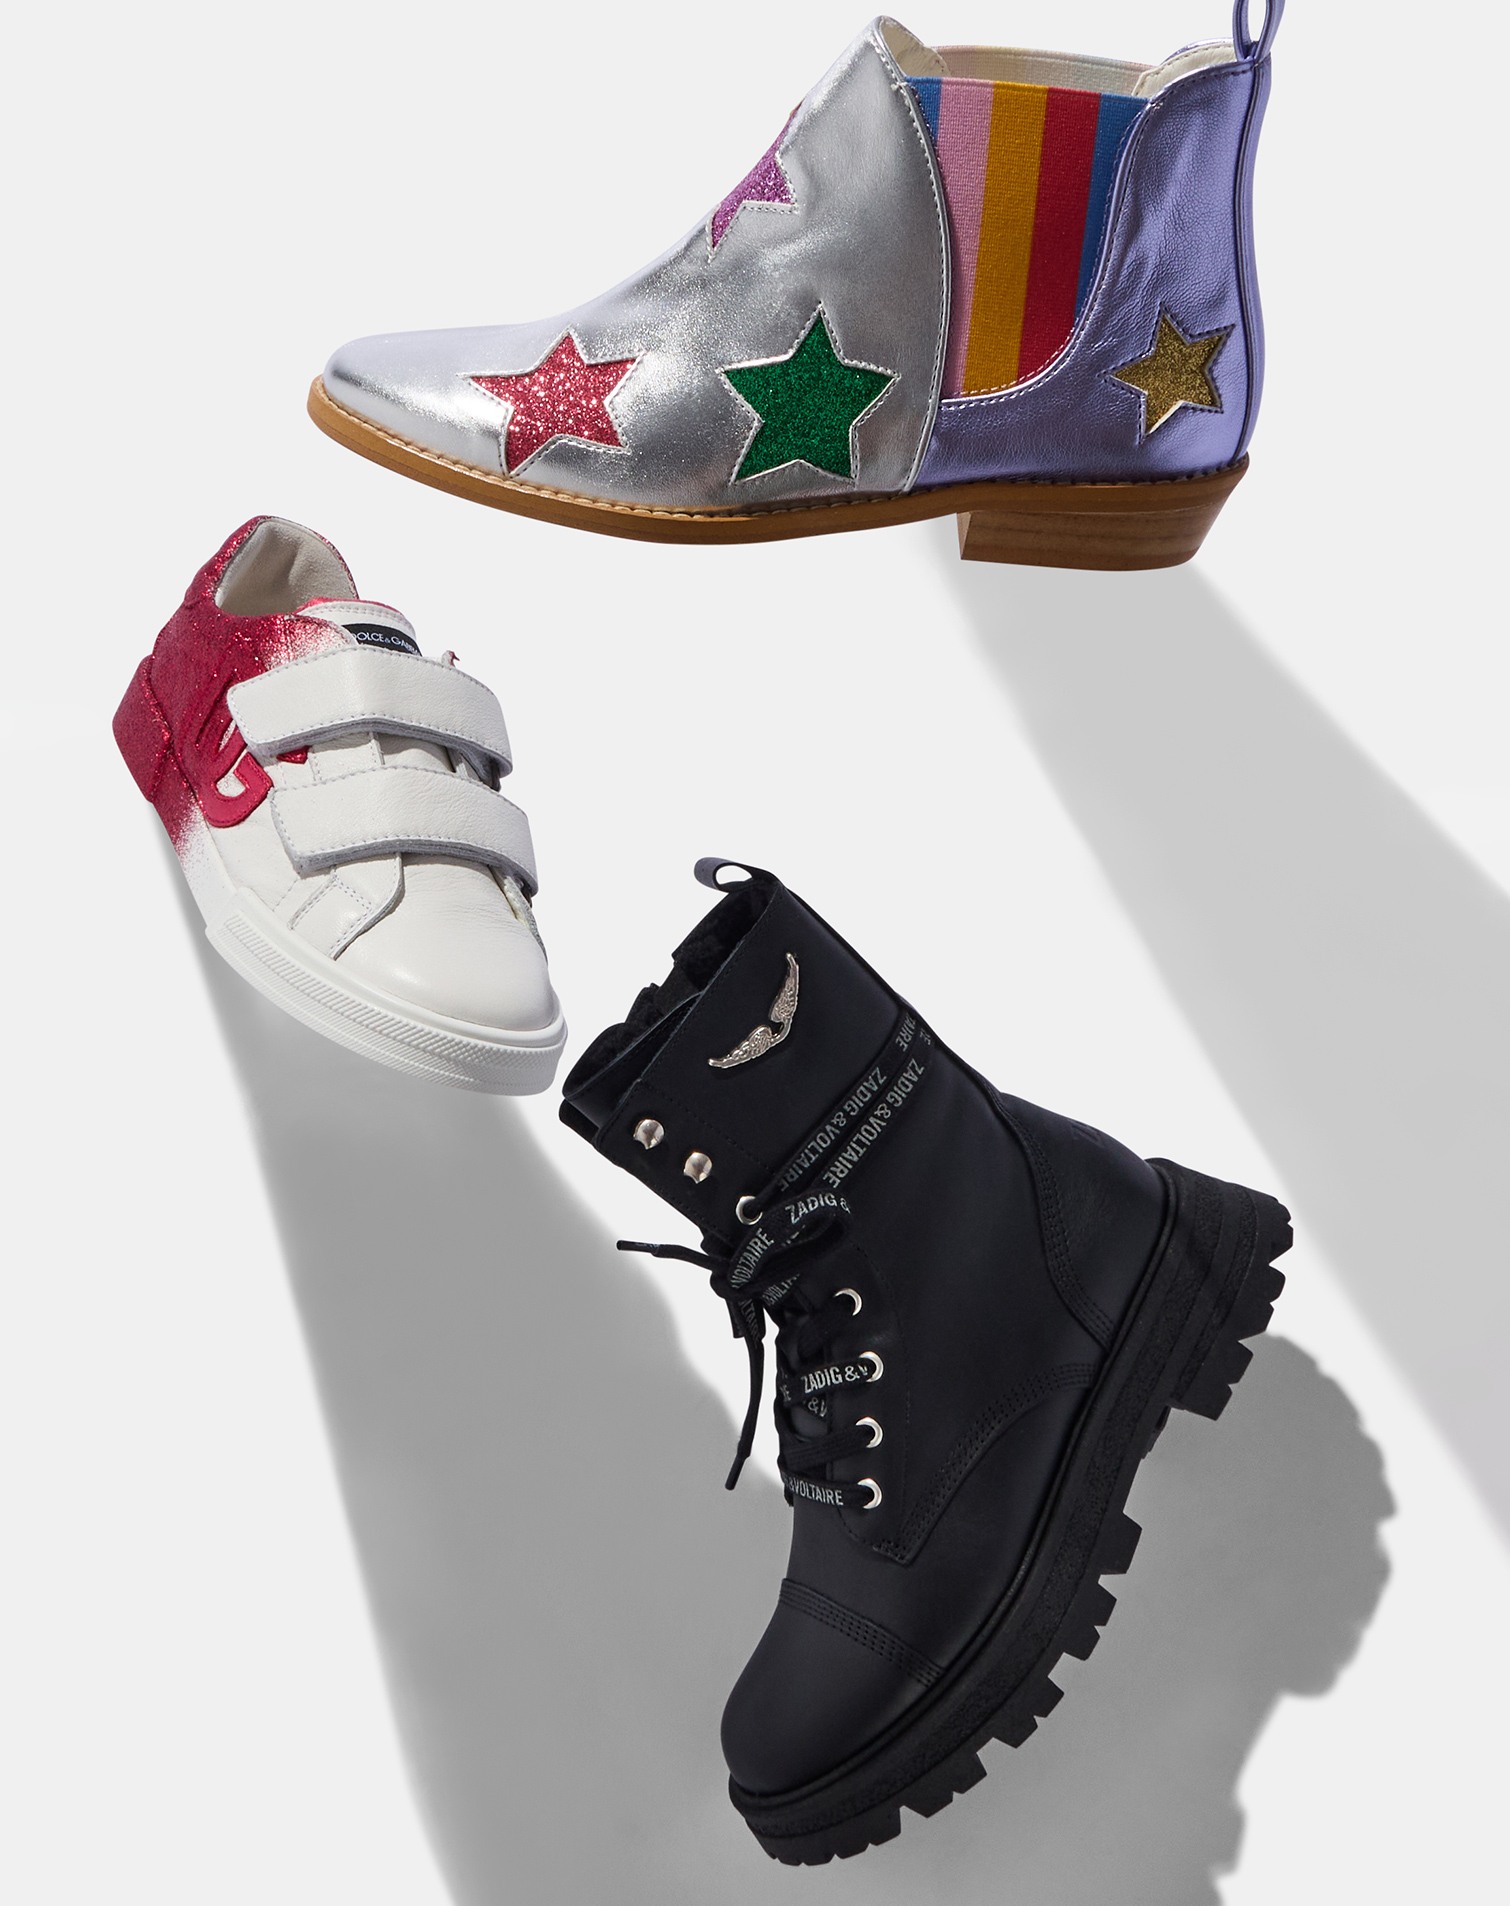 Stella McCartney boots, combat boots, sneakers